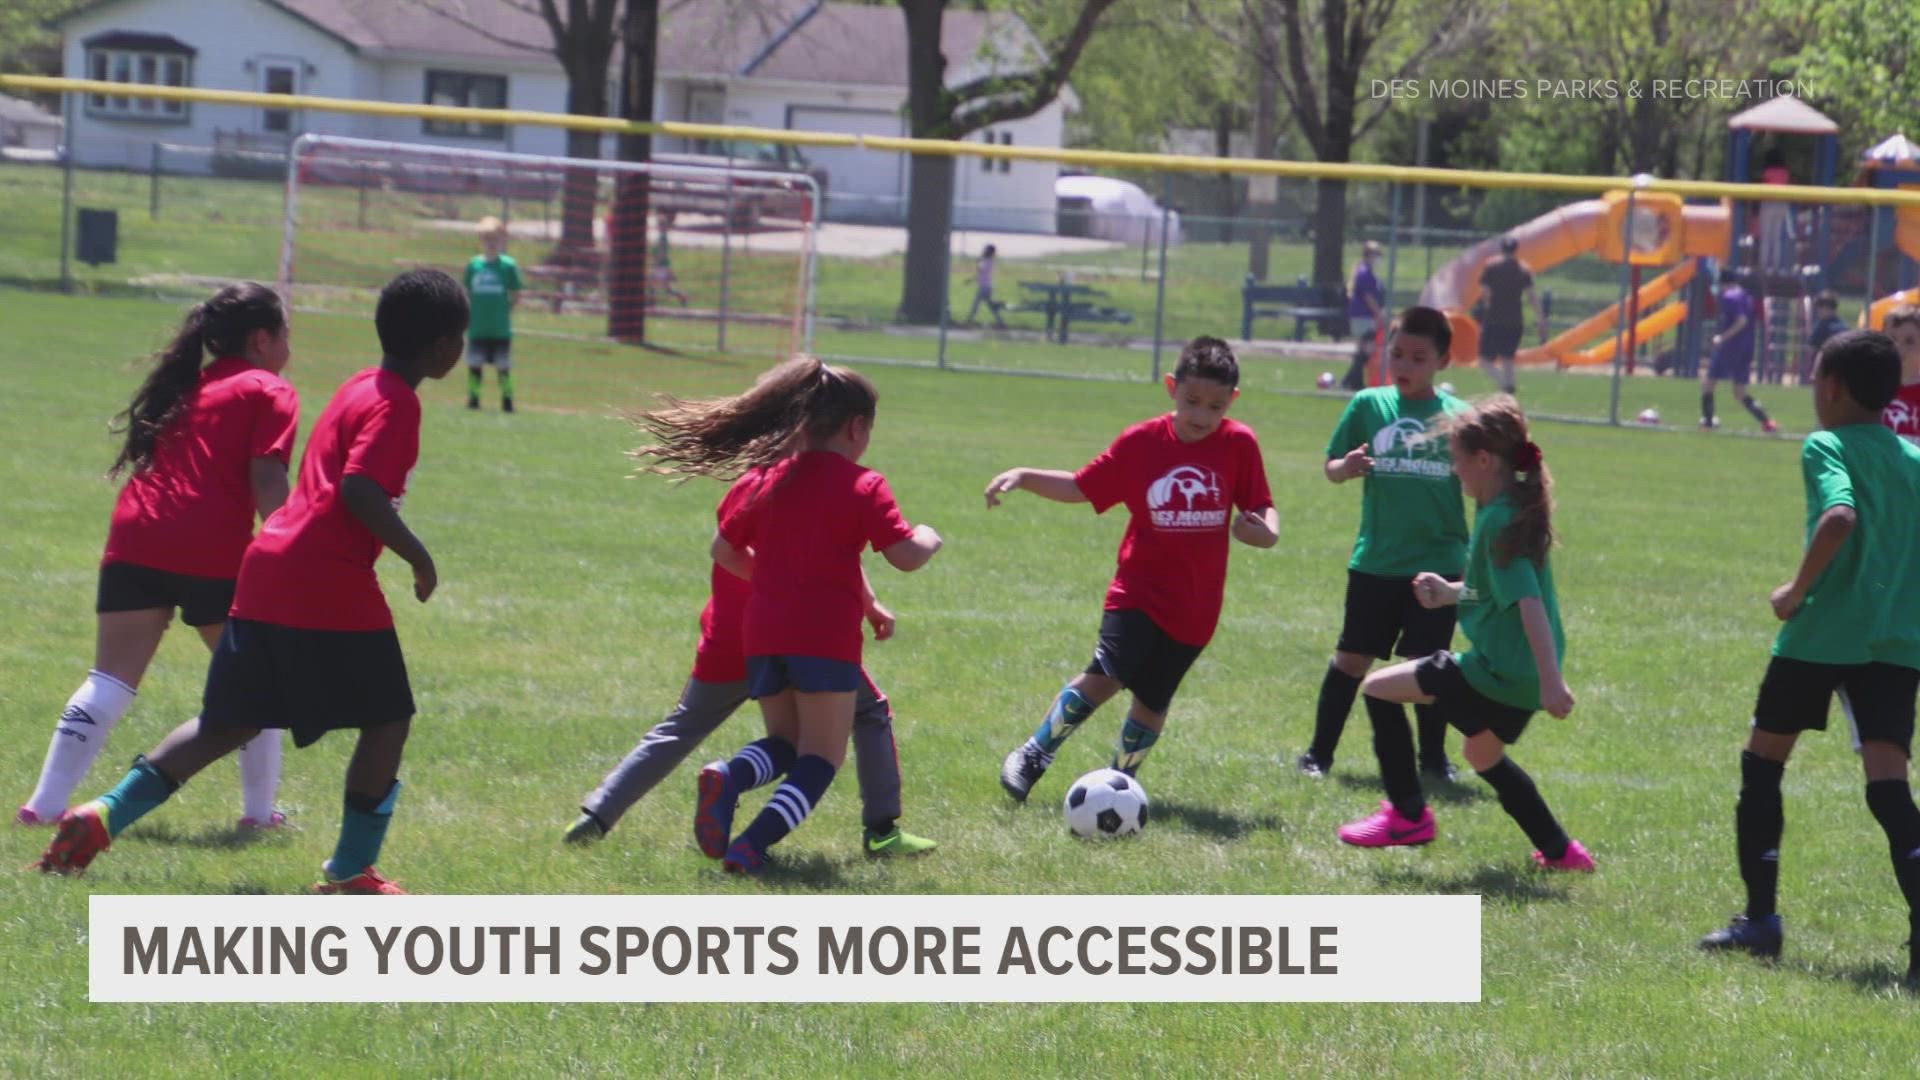 Studies have shown that kids who play sports are more likely to lead happy, healthy lifestyles, but not all kids have access to that opportunity.